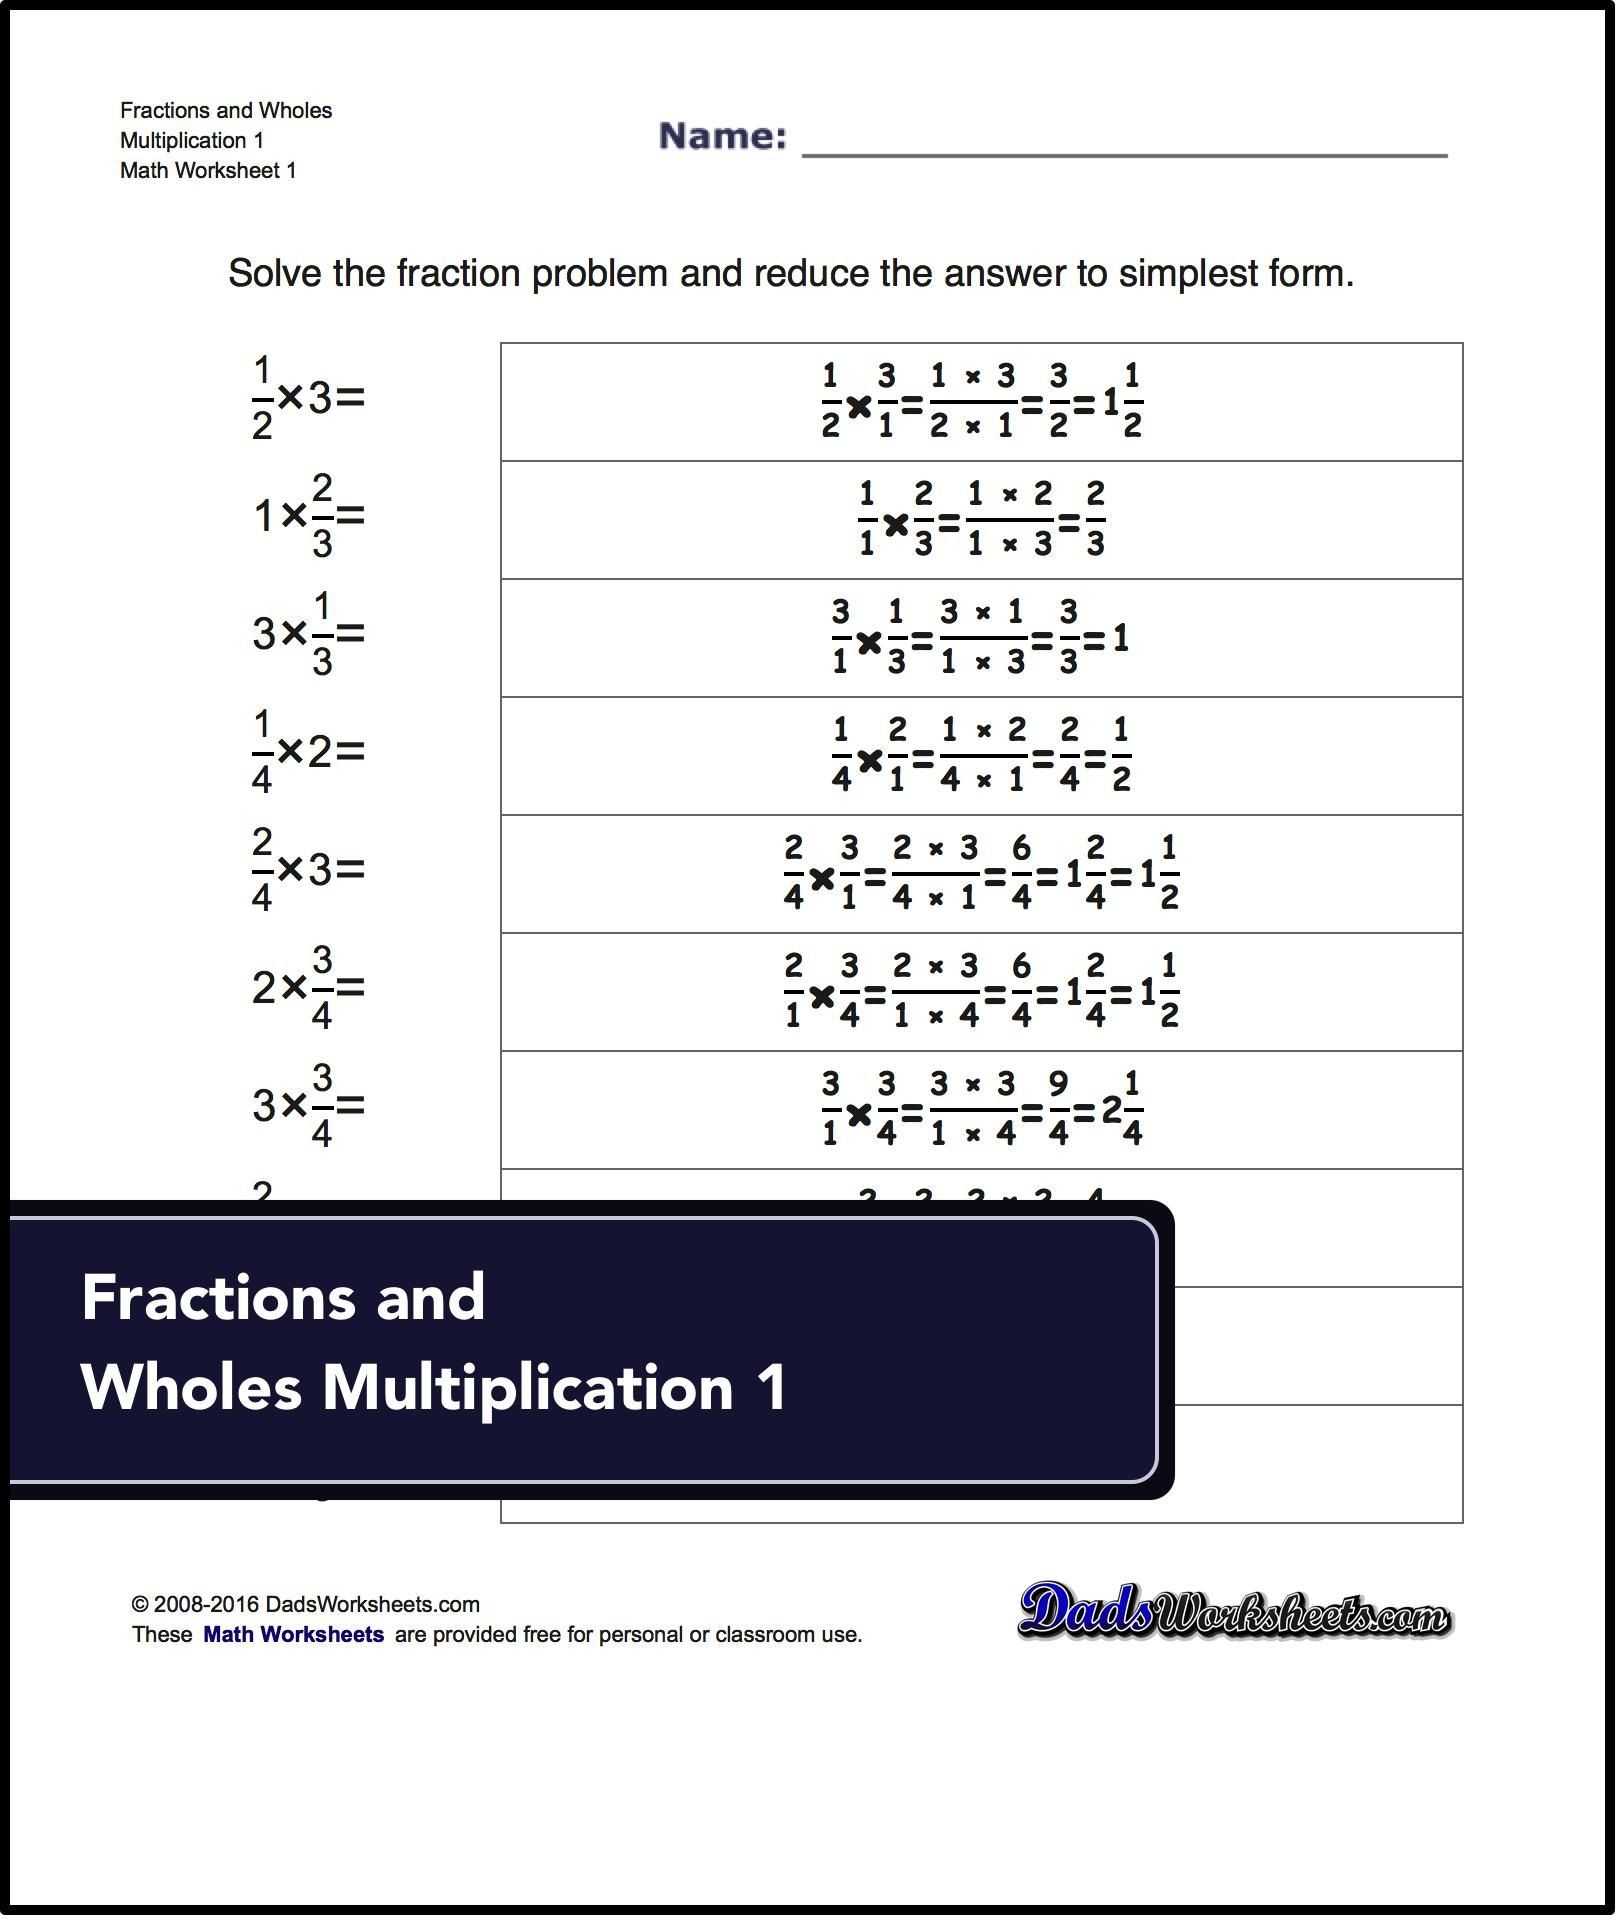 Reducing Fractions to Lowest Terms Worksheets and Fractions Worksheets to Do Refrence Basic Multiplying Fractions